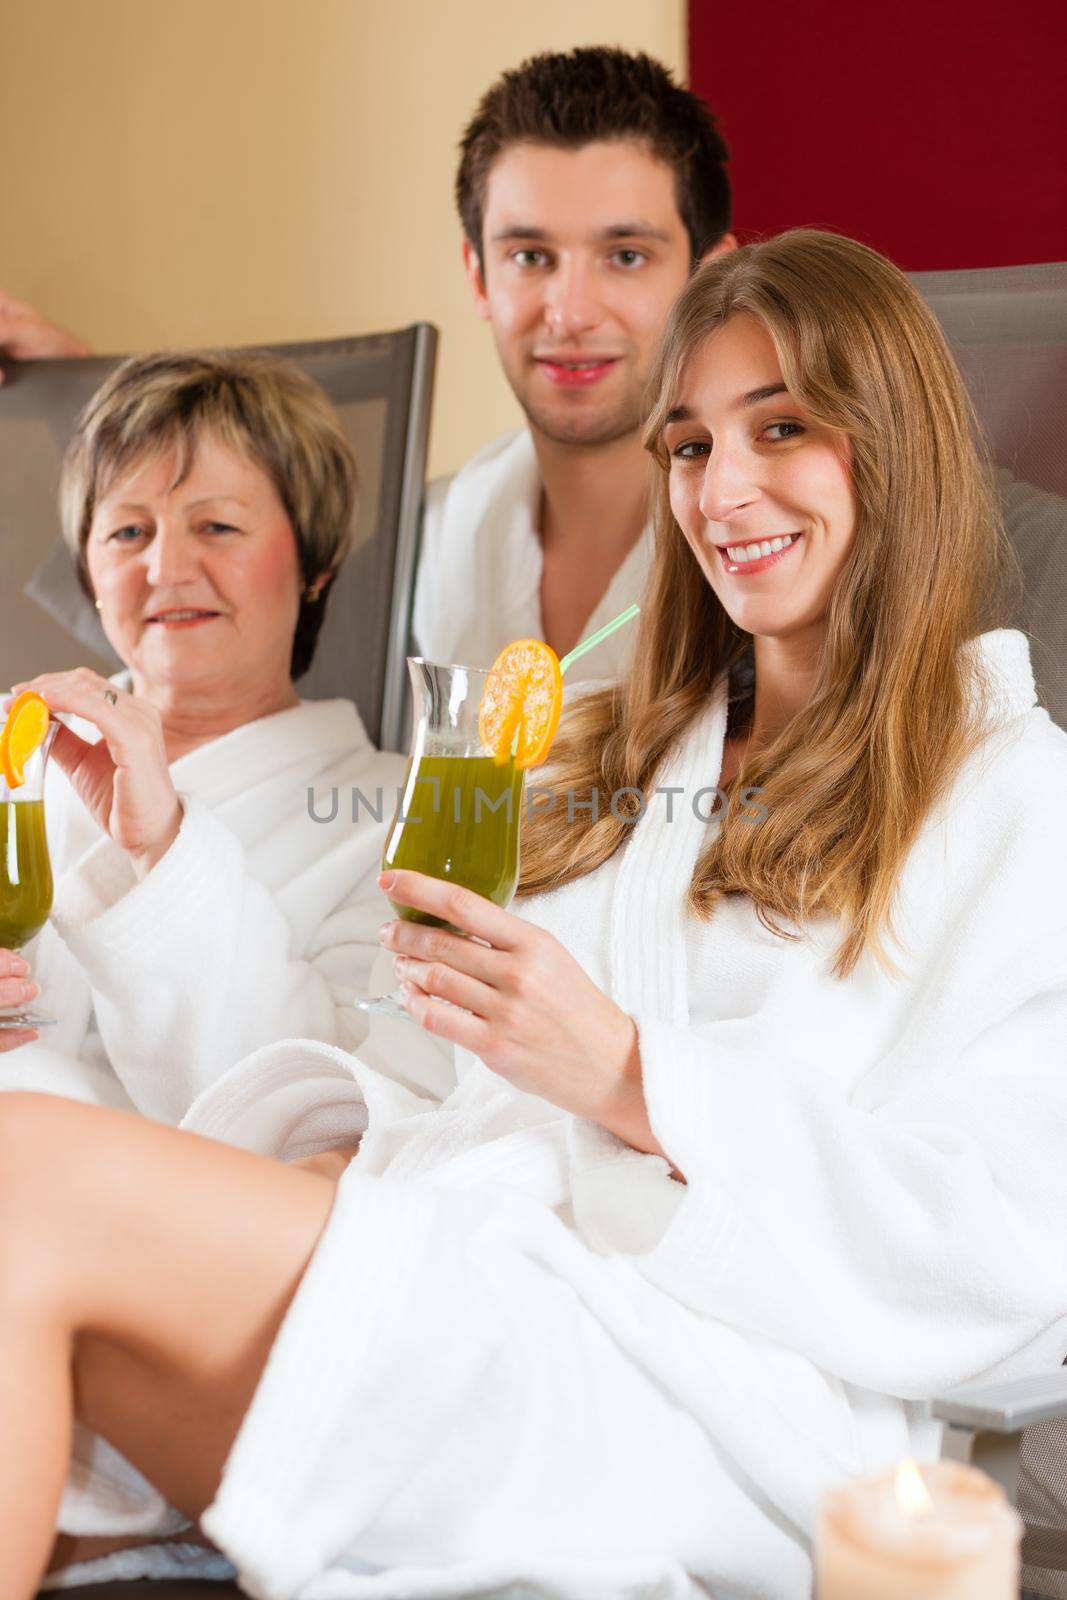 Wellness - People in Spa with Chlorophyll-Shake by Kzenon